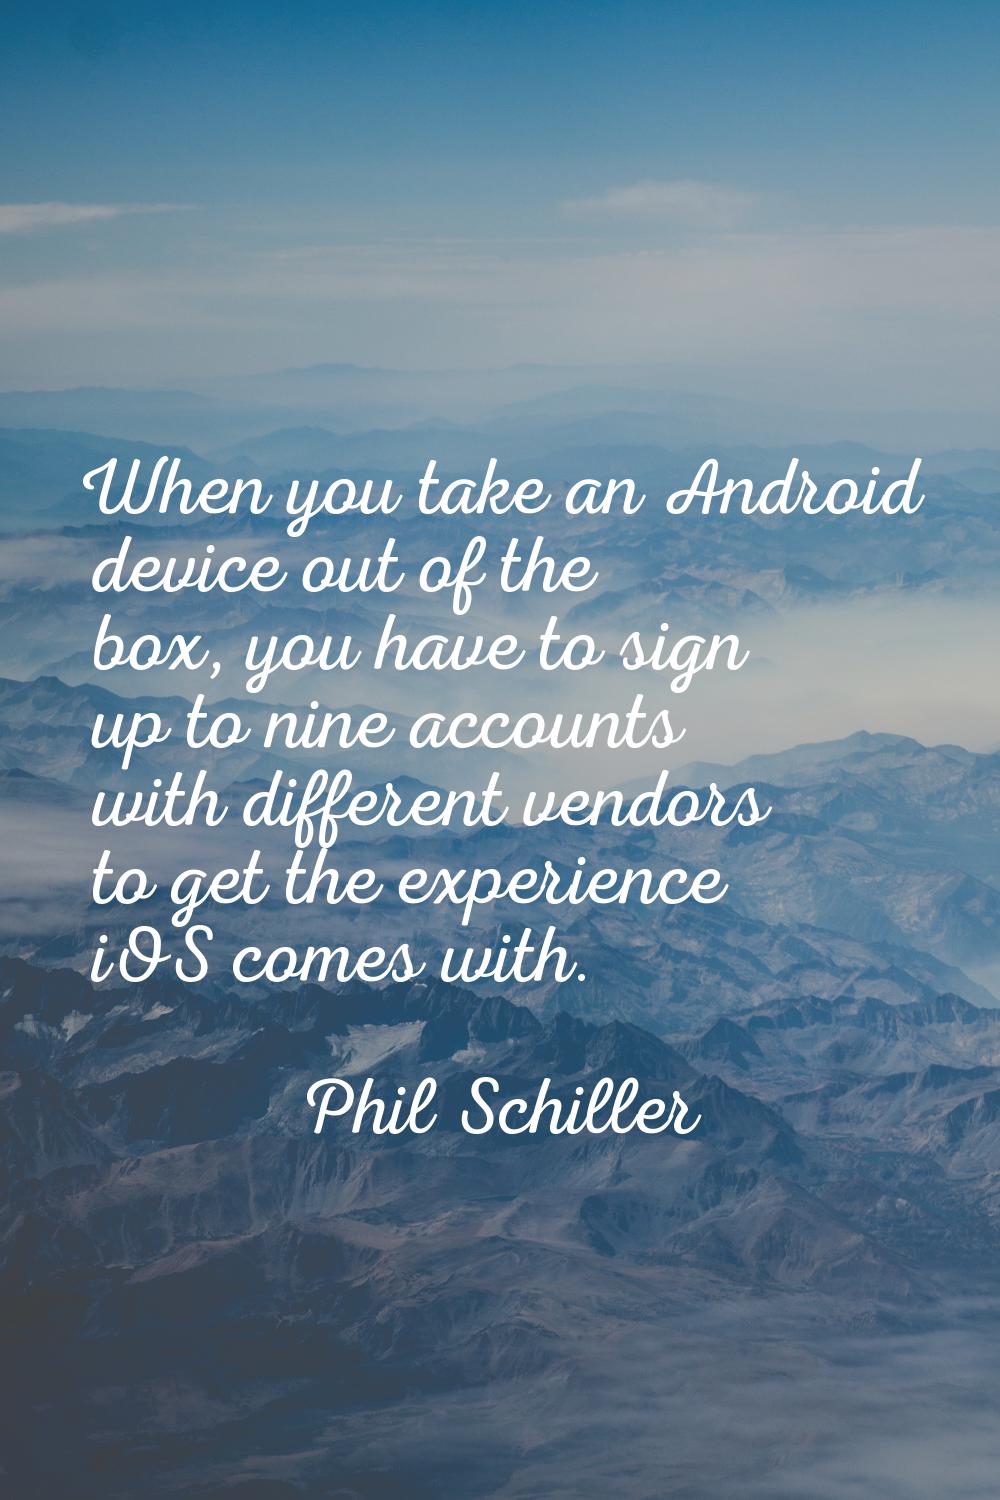 When you take an Android device out of the box, you have to sign up to nine accounts with different